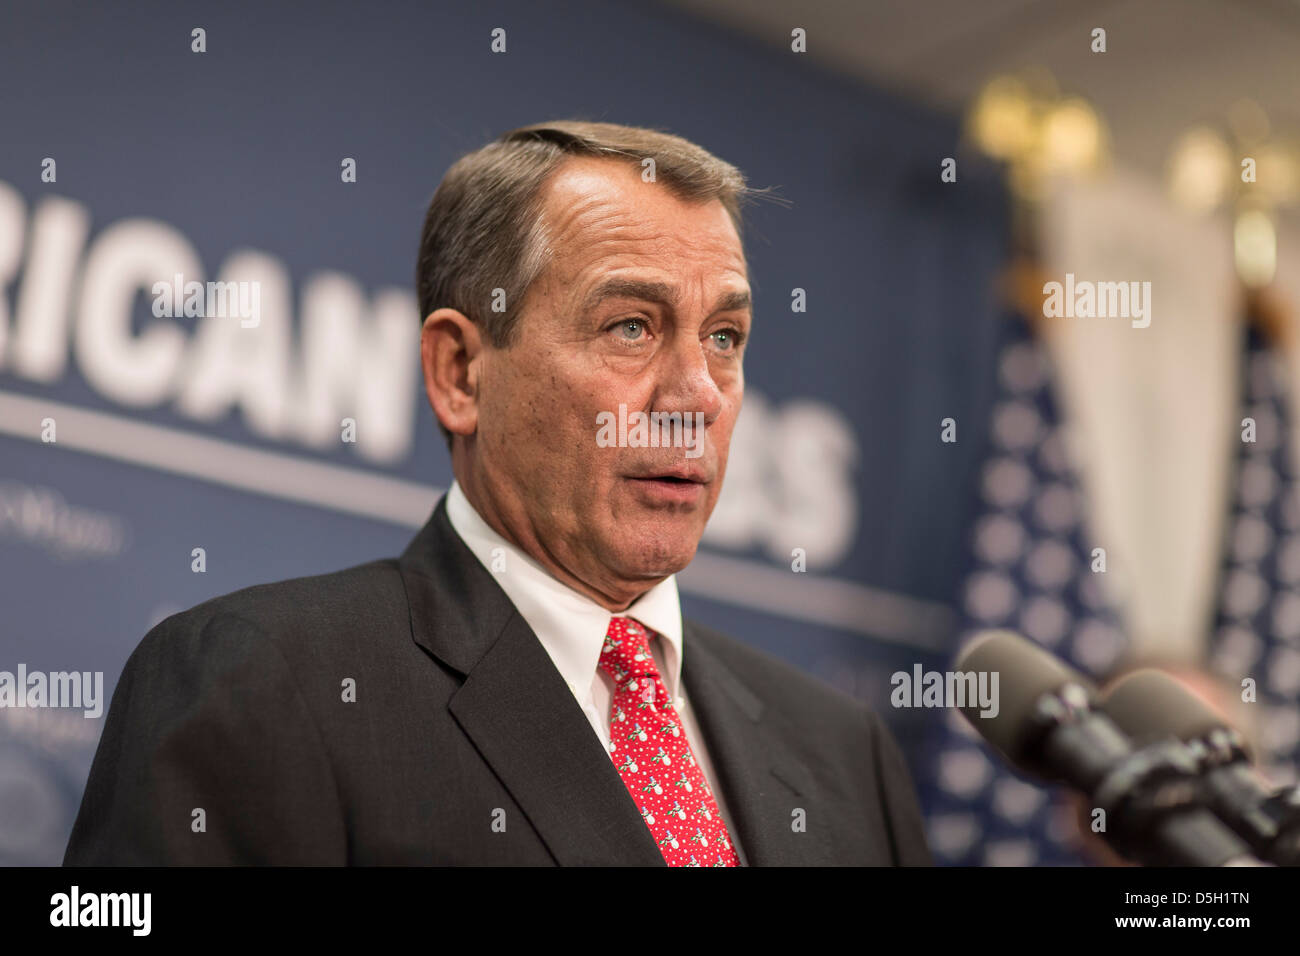 Speaker of the House John Boehner (R-OH) speaks at a press conference after a Republican caucus meeting on Capitol Hill. Stock Photo